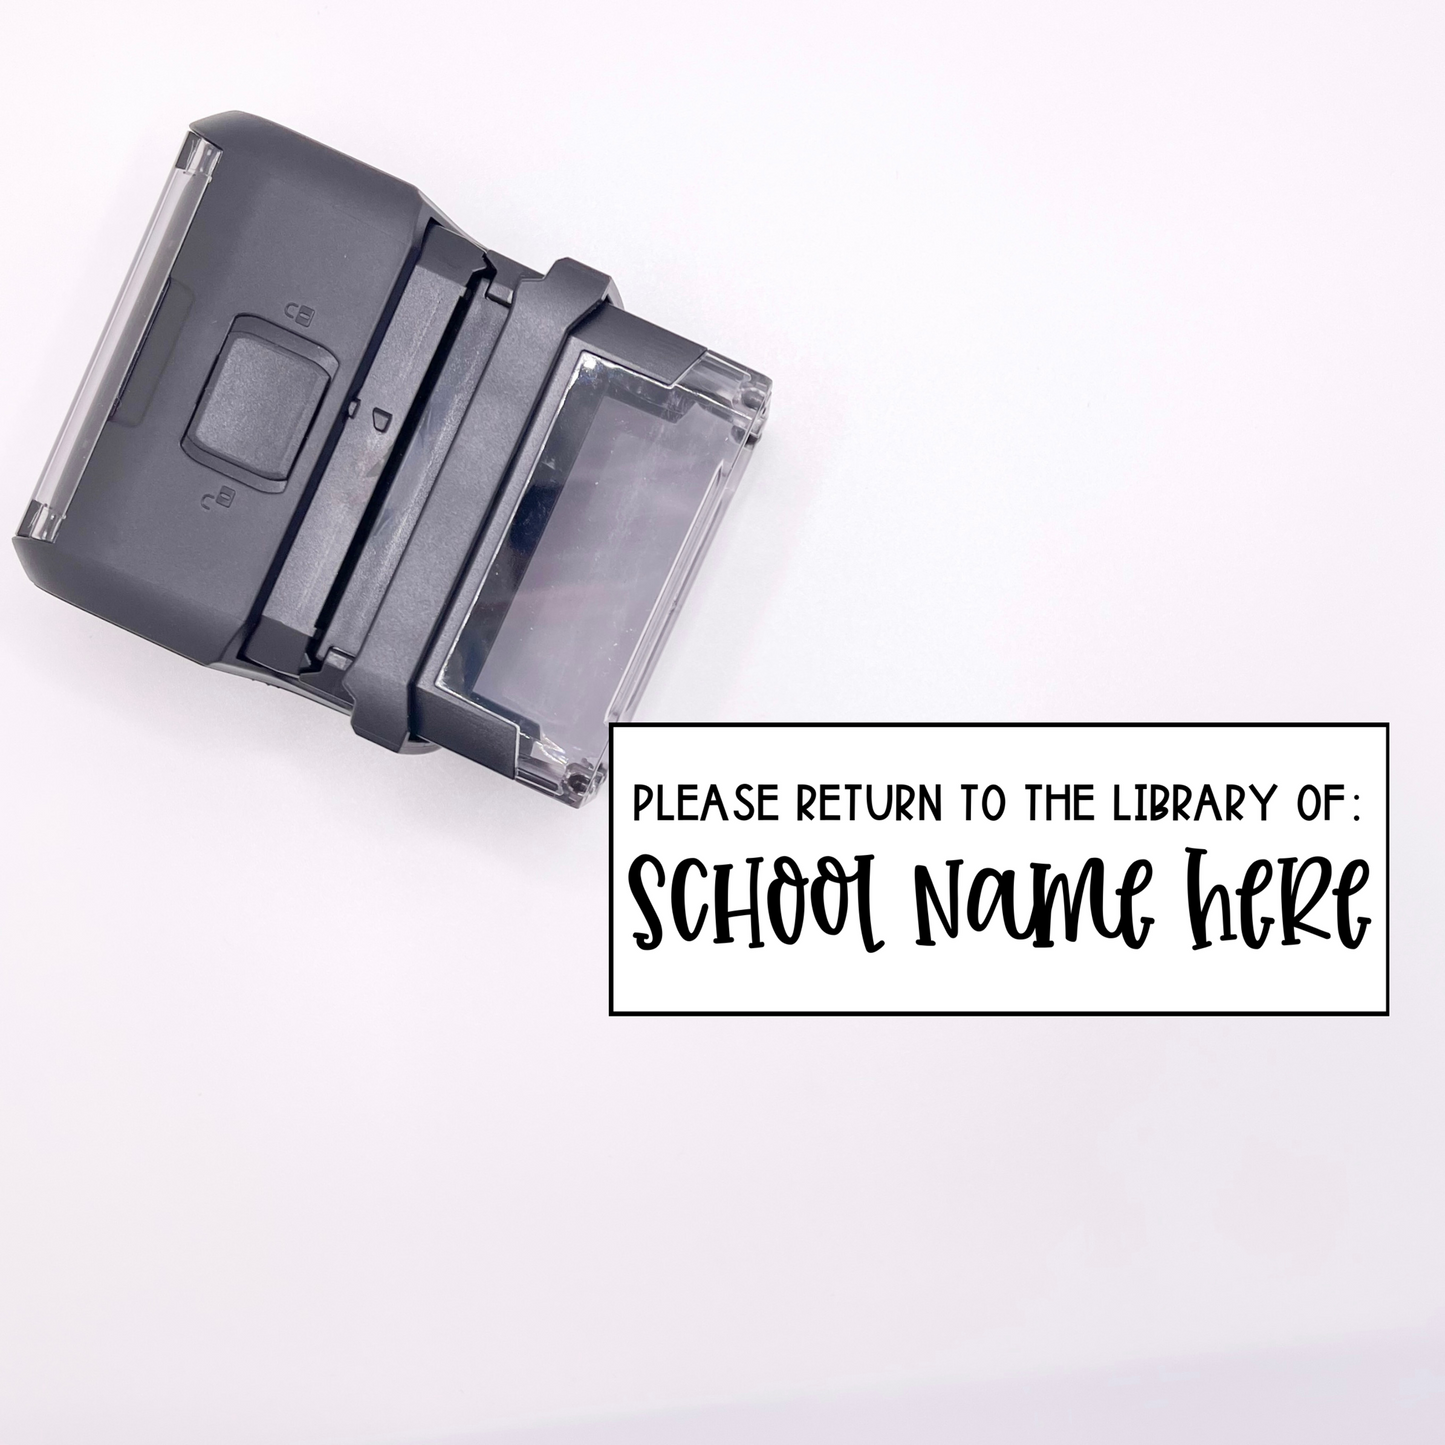 "Please return to the library of" Self-Inking Stamp